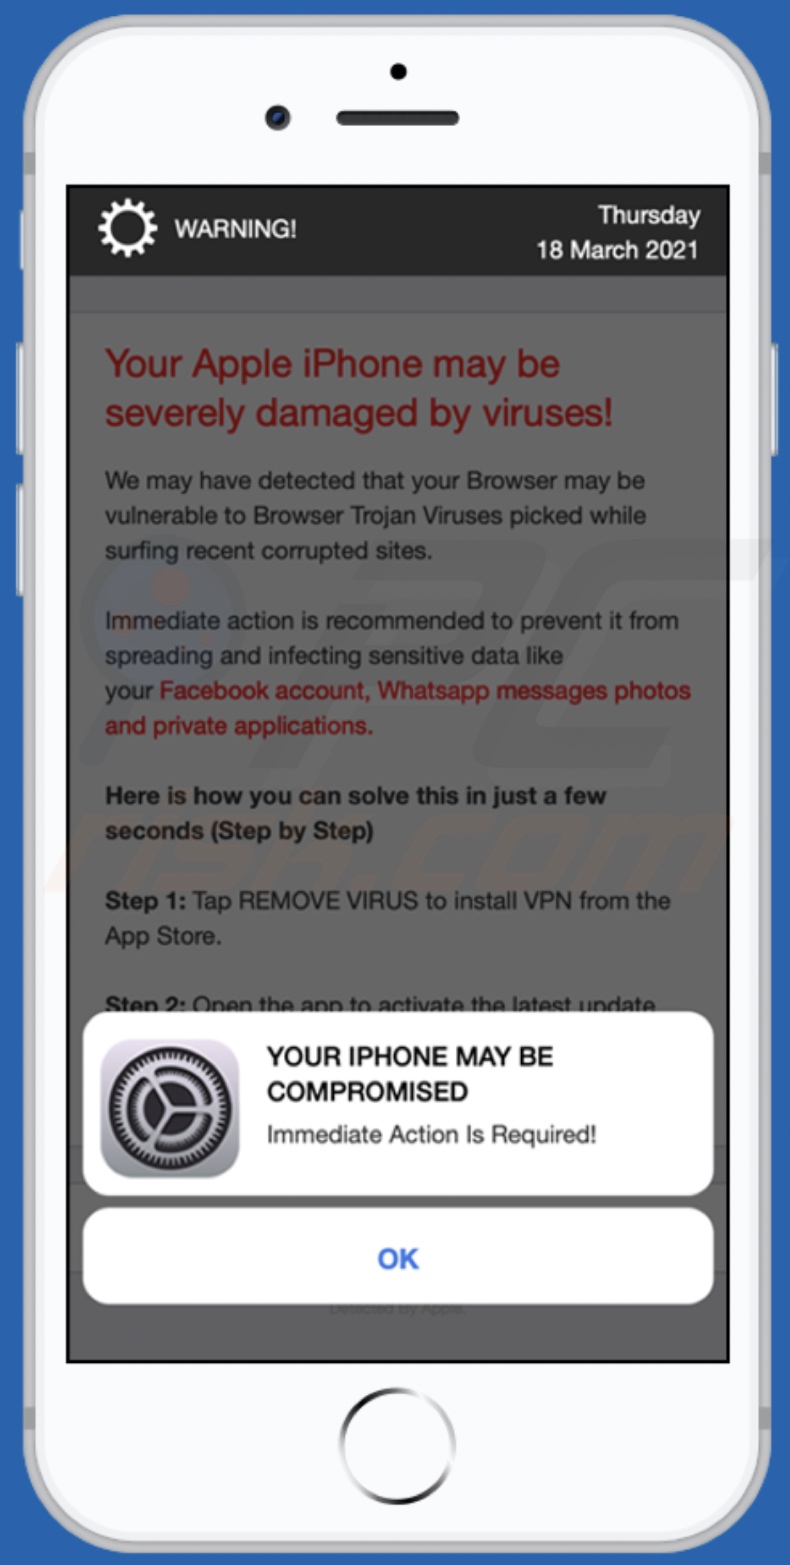 Your Apple iPhone may be severely damaged by viruses! pop up truffa